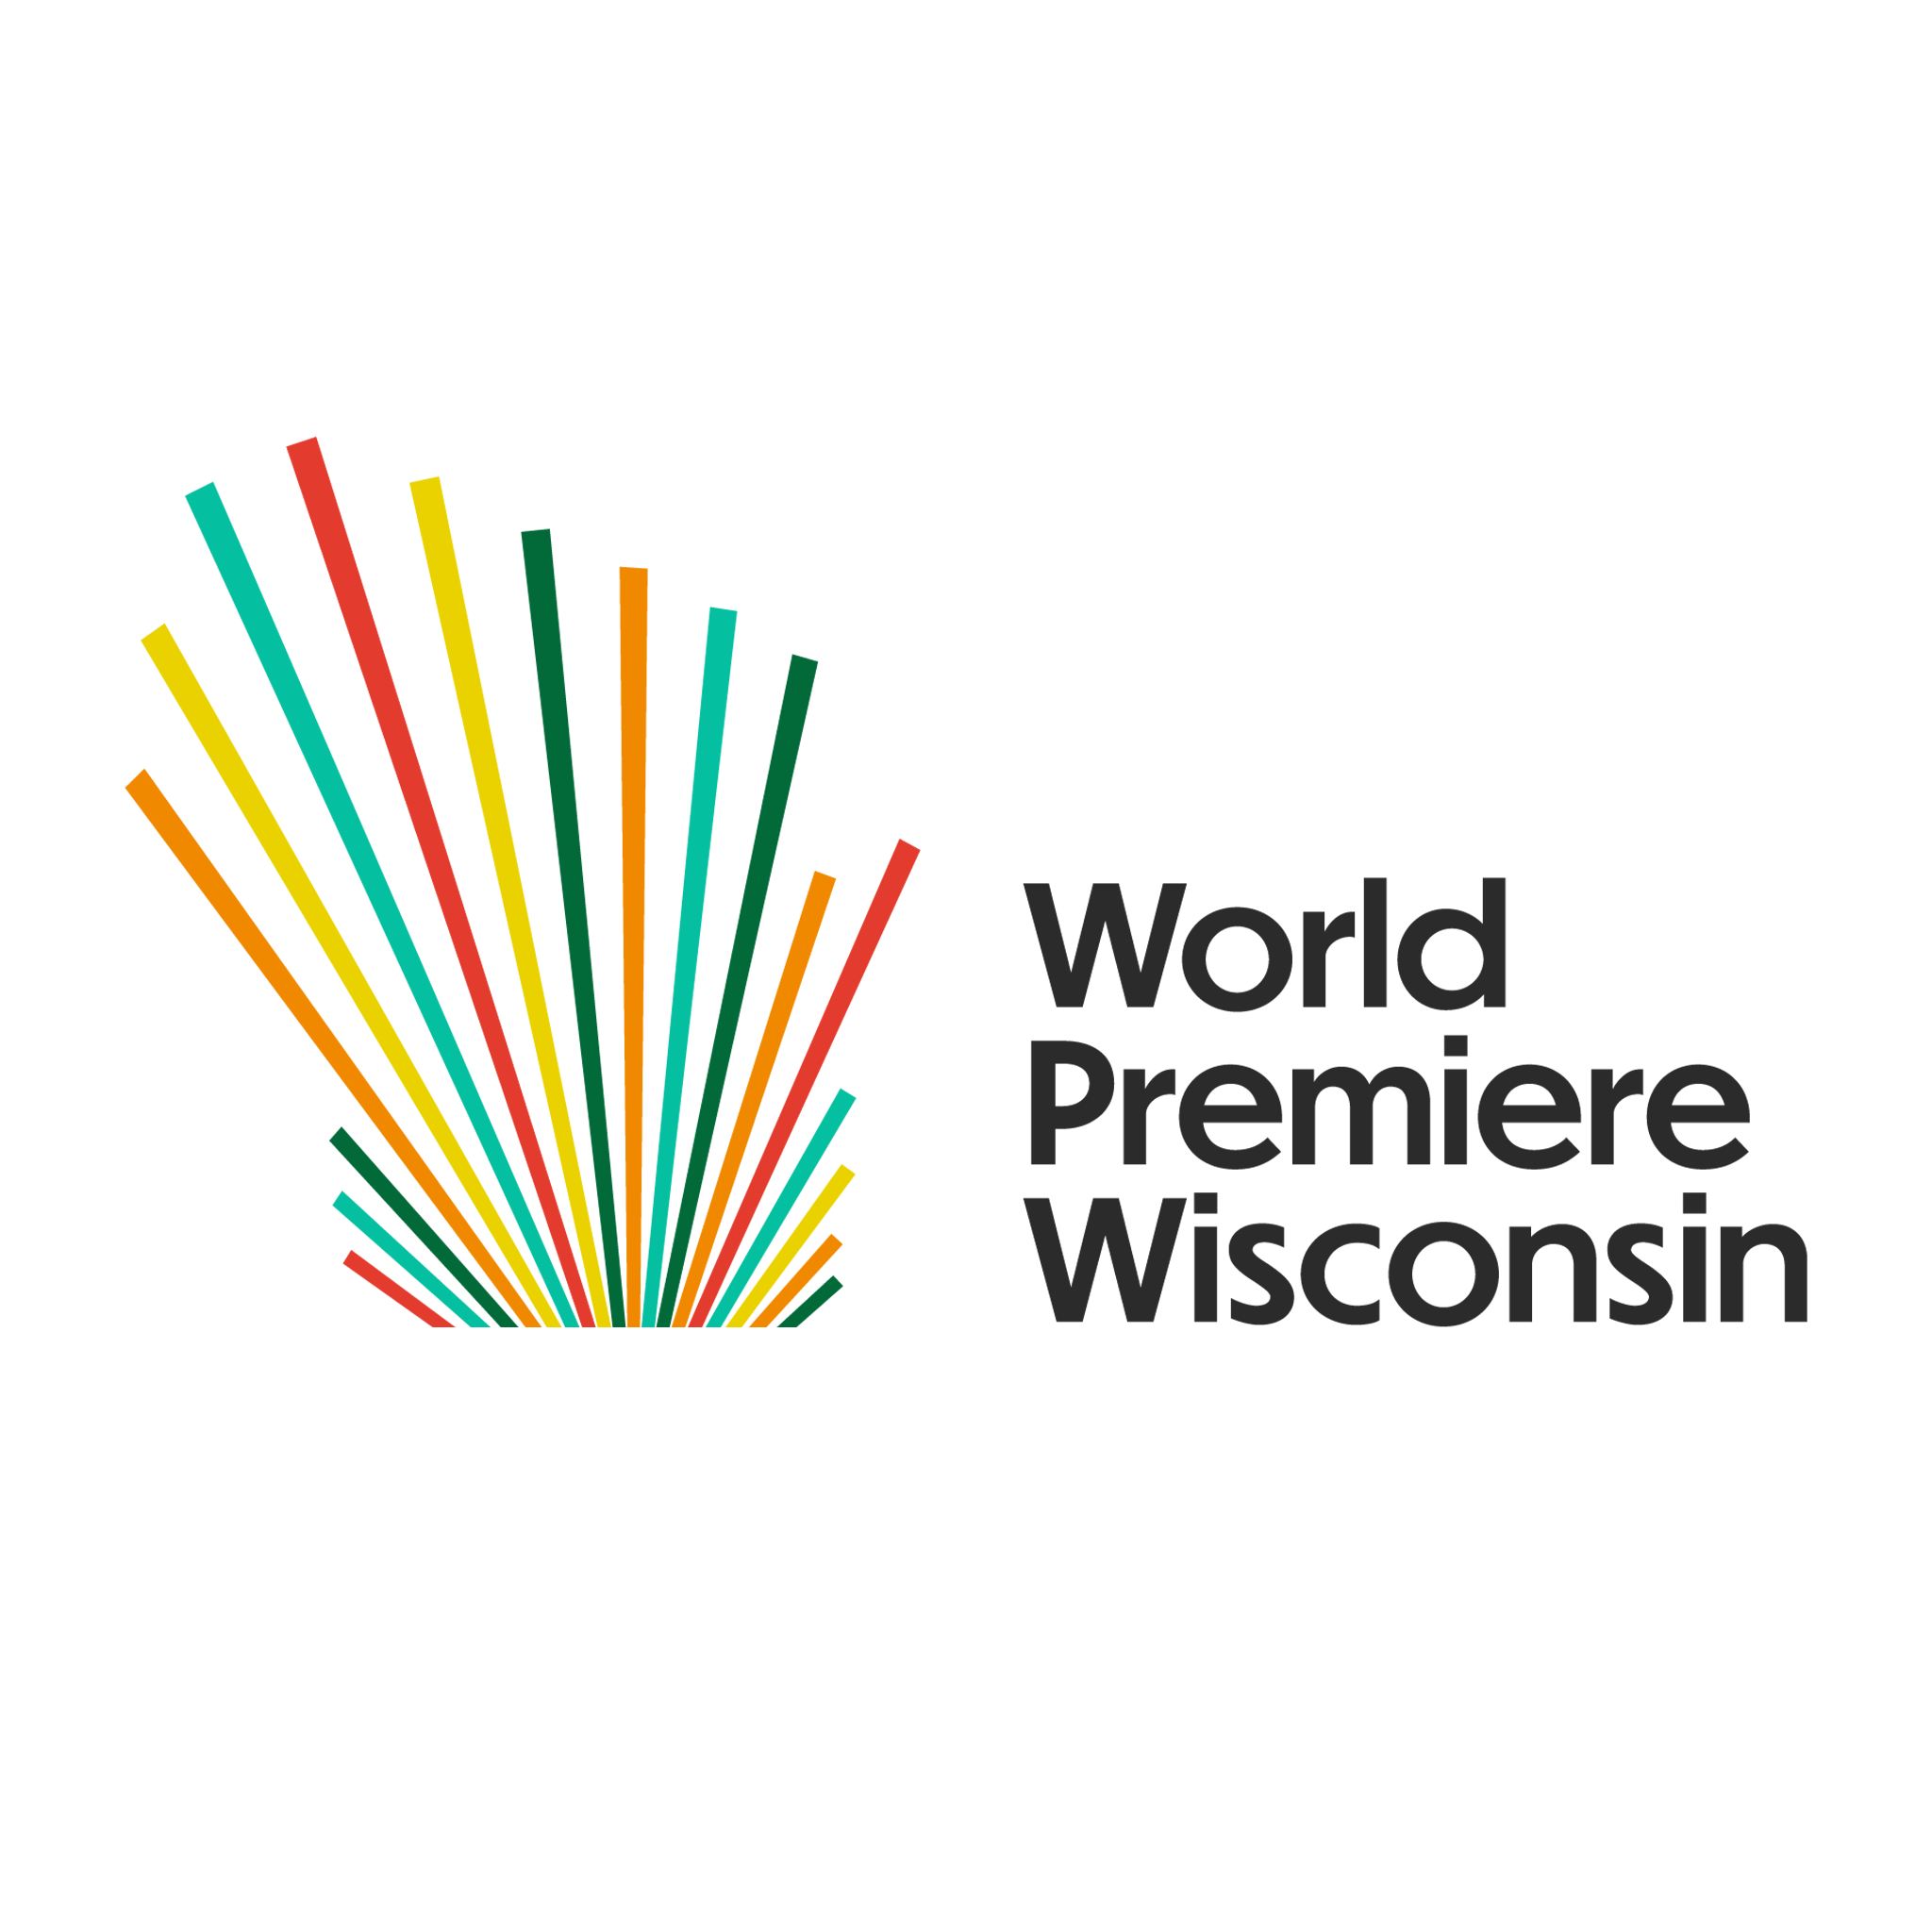 World Premiere Wisconsin Inaugural statewide theater festival celebrating new plays and musicals runs March 1 – June 30, 2023